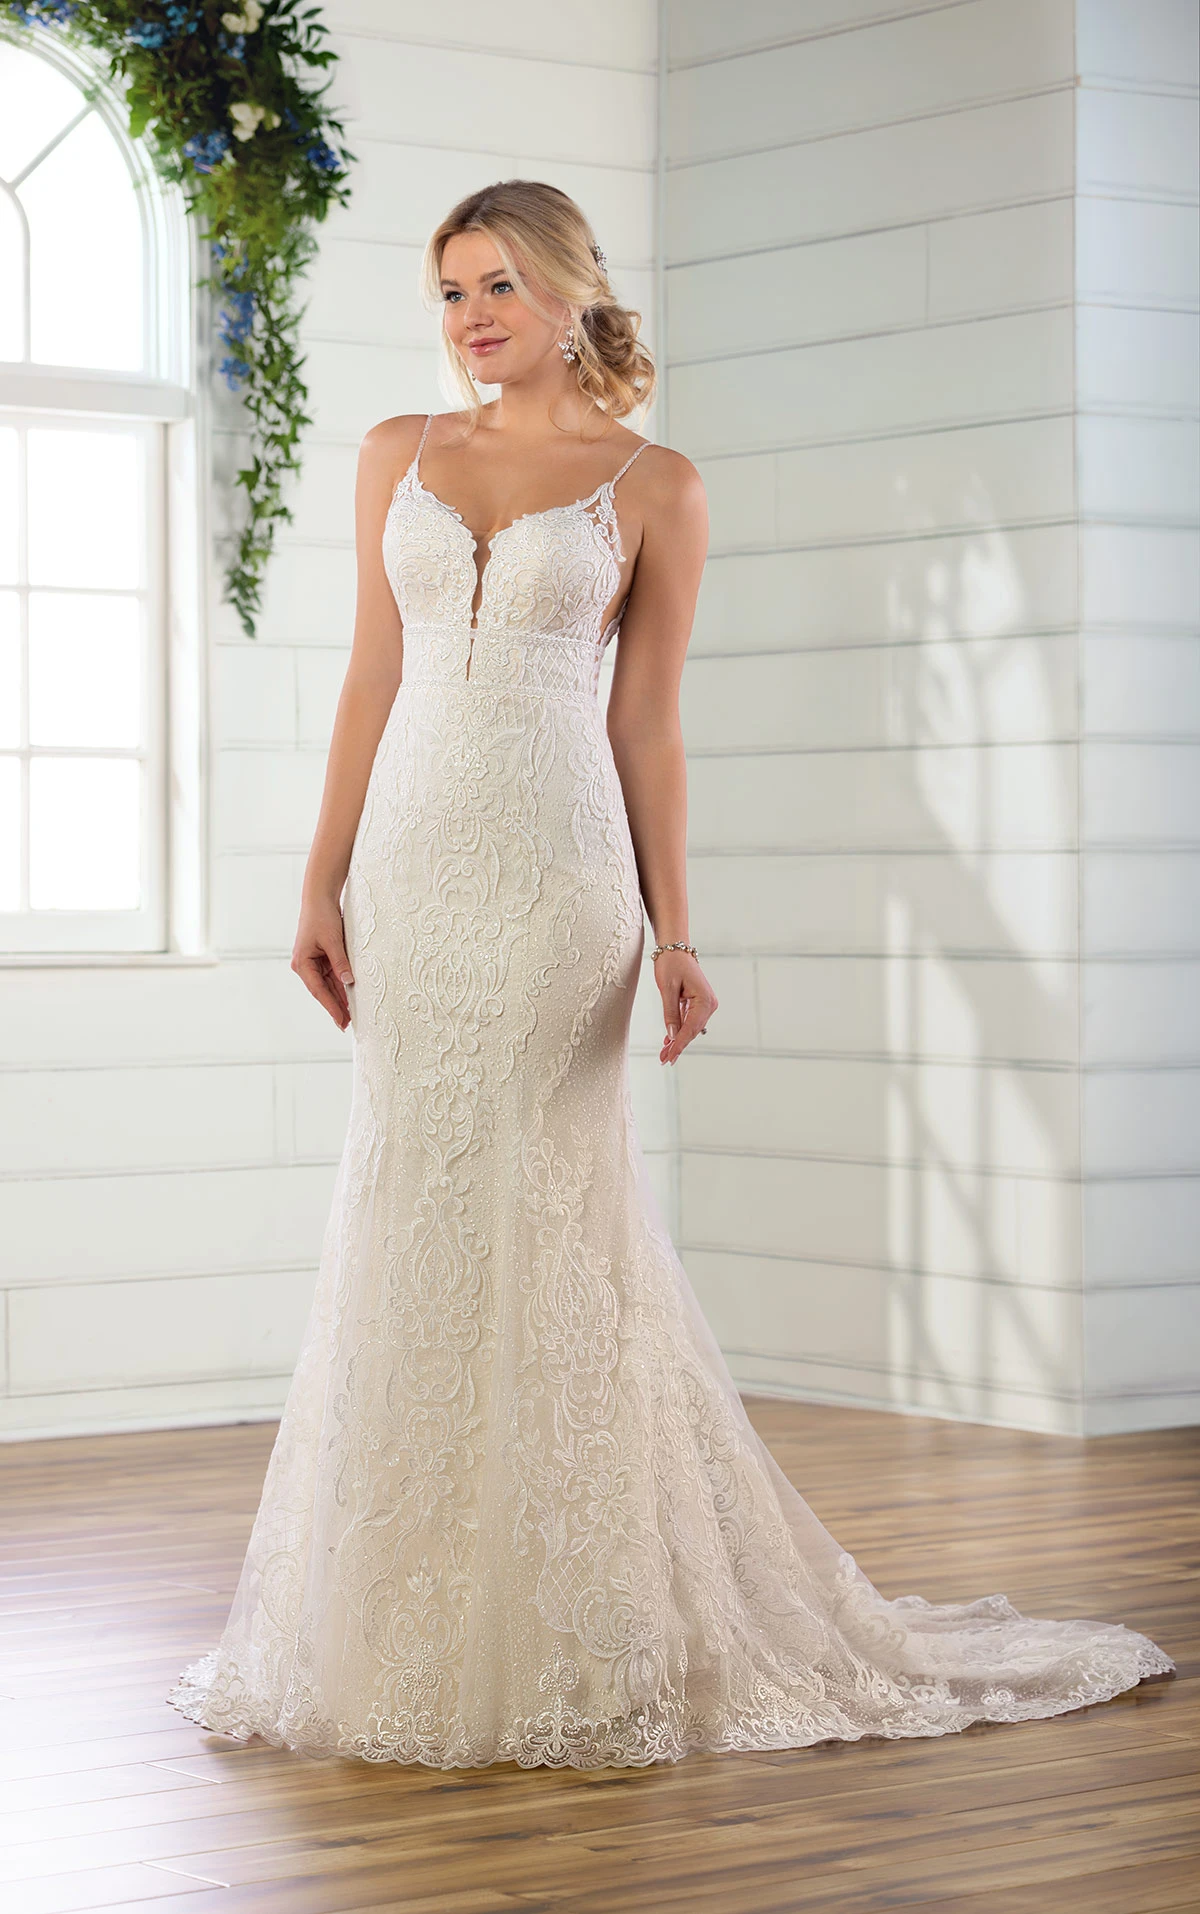 Double Banded Lace Wedding Dress with Glittery Tulle